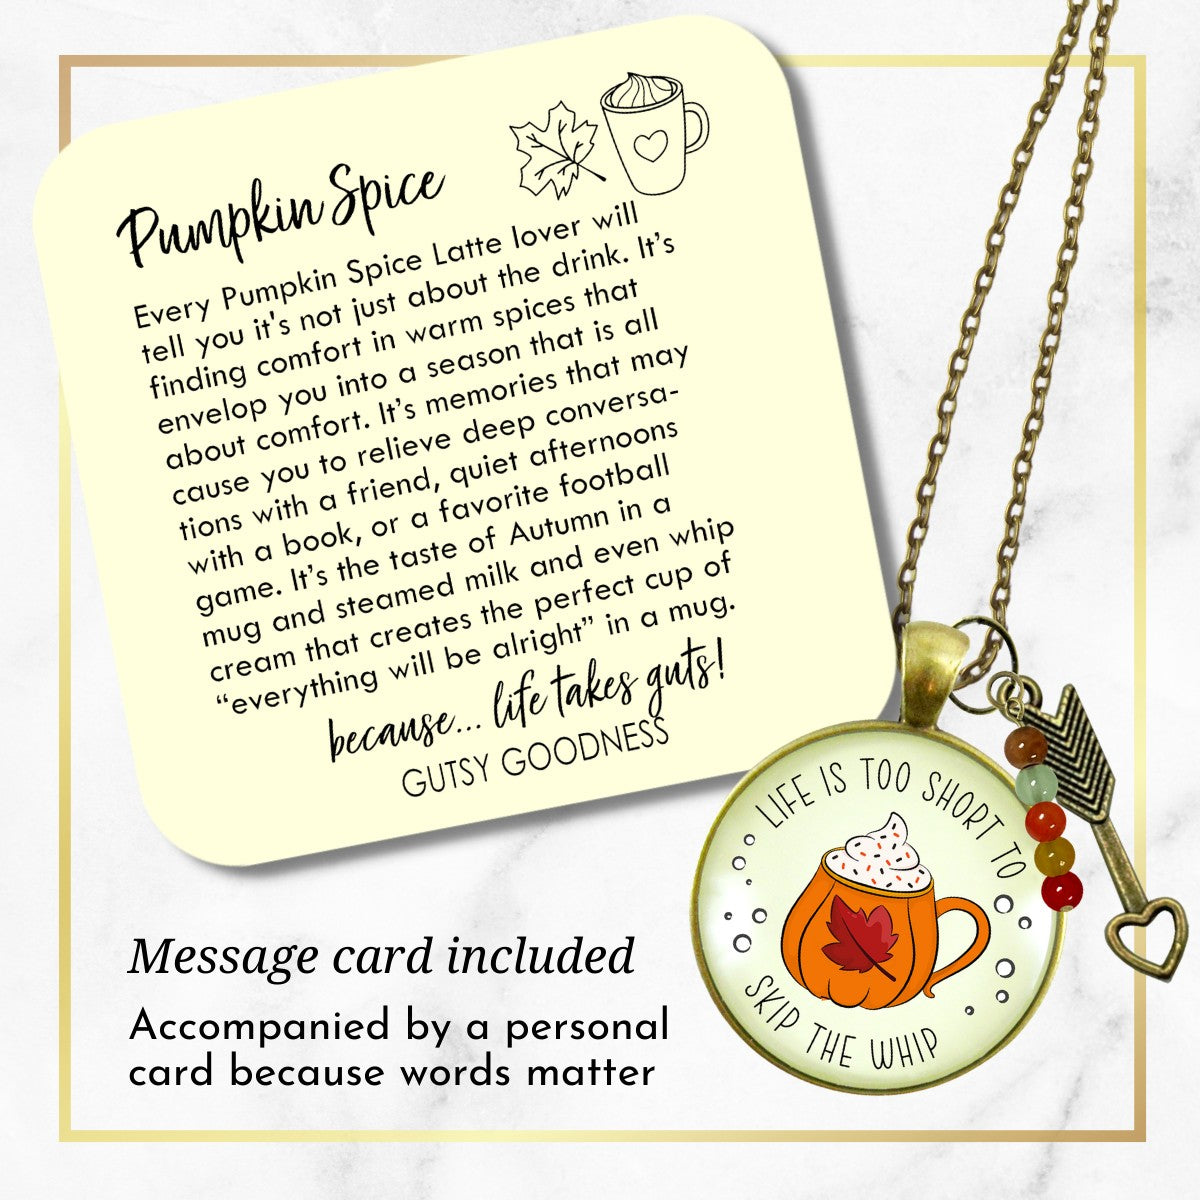 Pumpkin Spice Necklace Life is Too Short to Skip Whip Cream Autumn Quote Dessert Lover Leaf Mug Costume Fashion Jewelry For Women  Necklace - Gutsy Goodness Handmade Jewelry